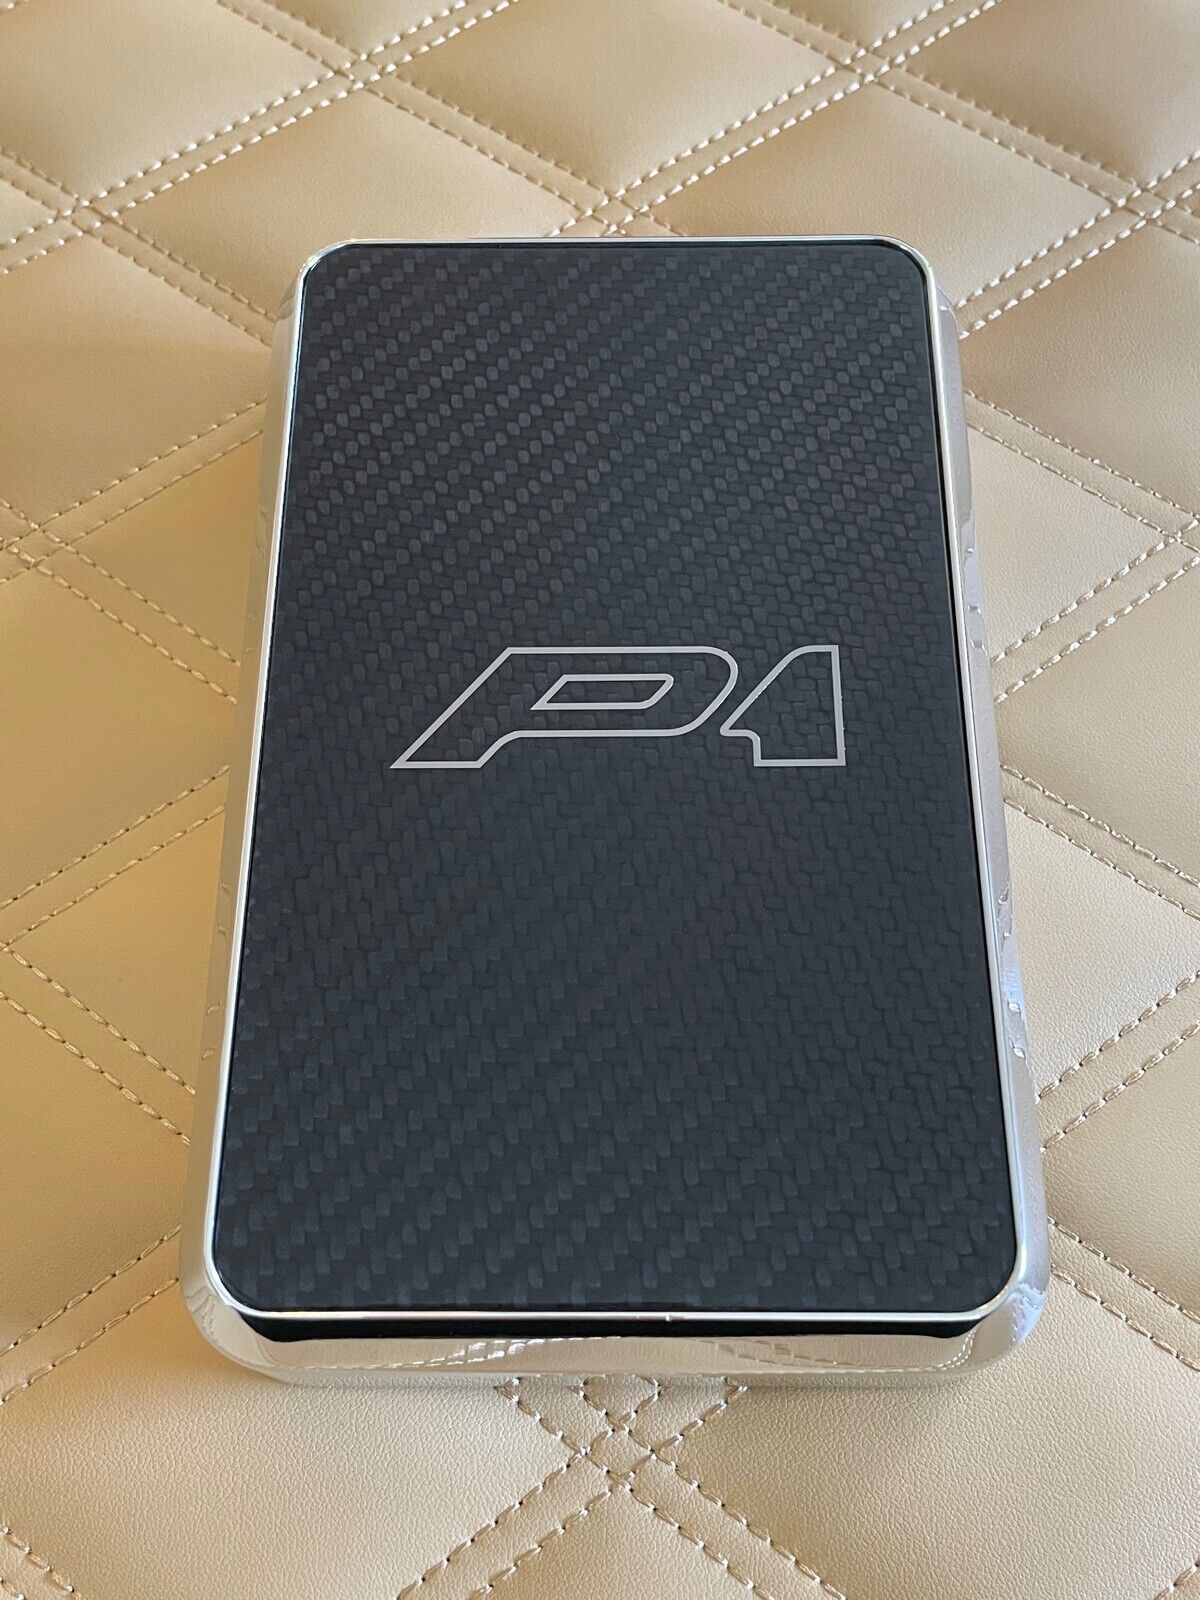 Mclaren P1 Carbon Fiber Owners Key Storage Box 1 of 375 Globally Collectible 